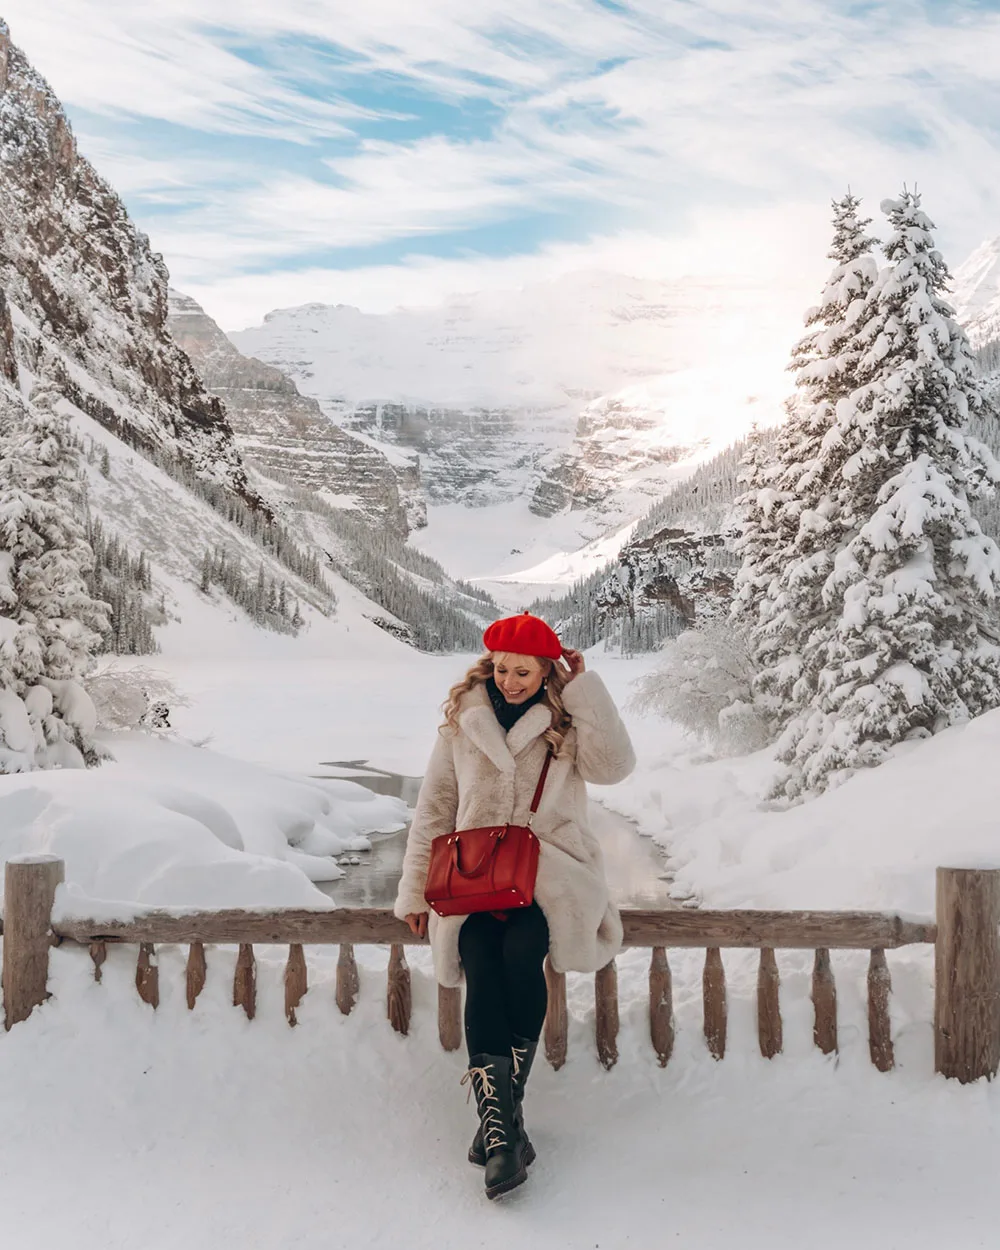 downtown BANFF in alberta, canada, oversized scarf, sorel boots, winter  outfit idea